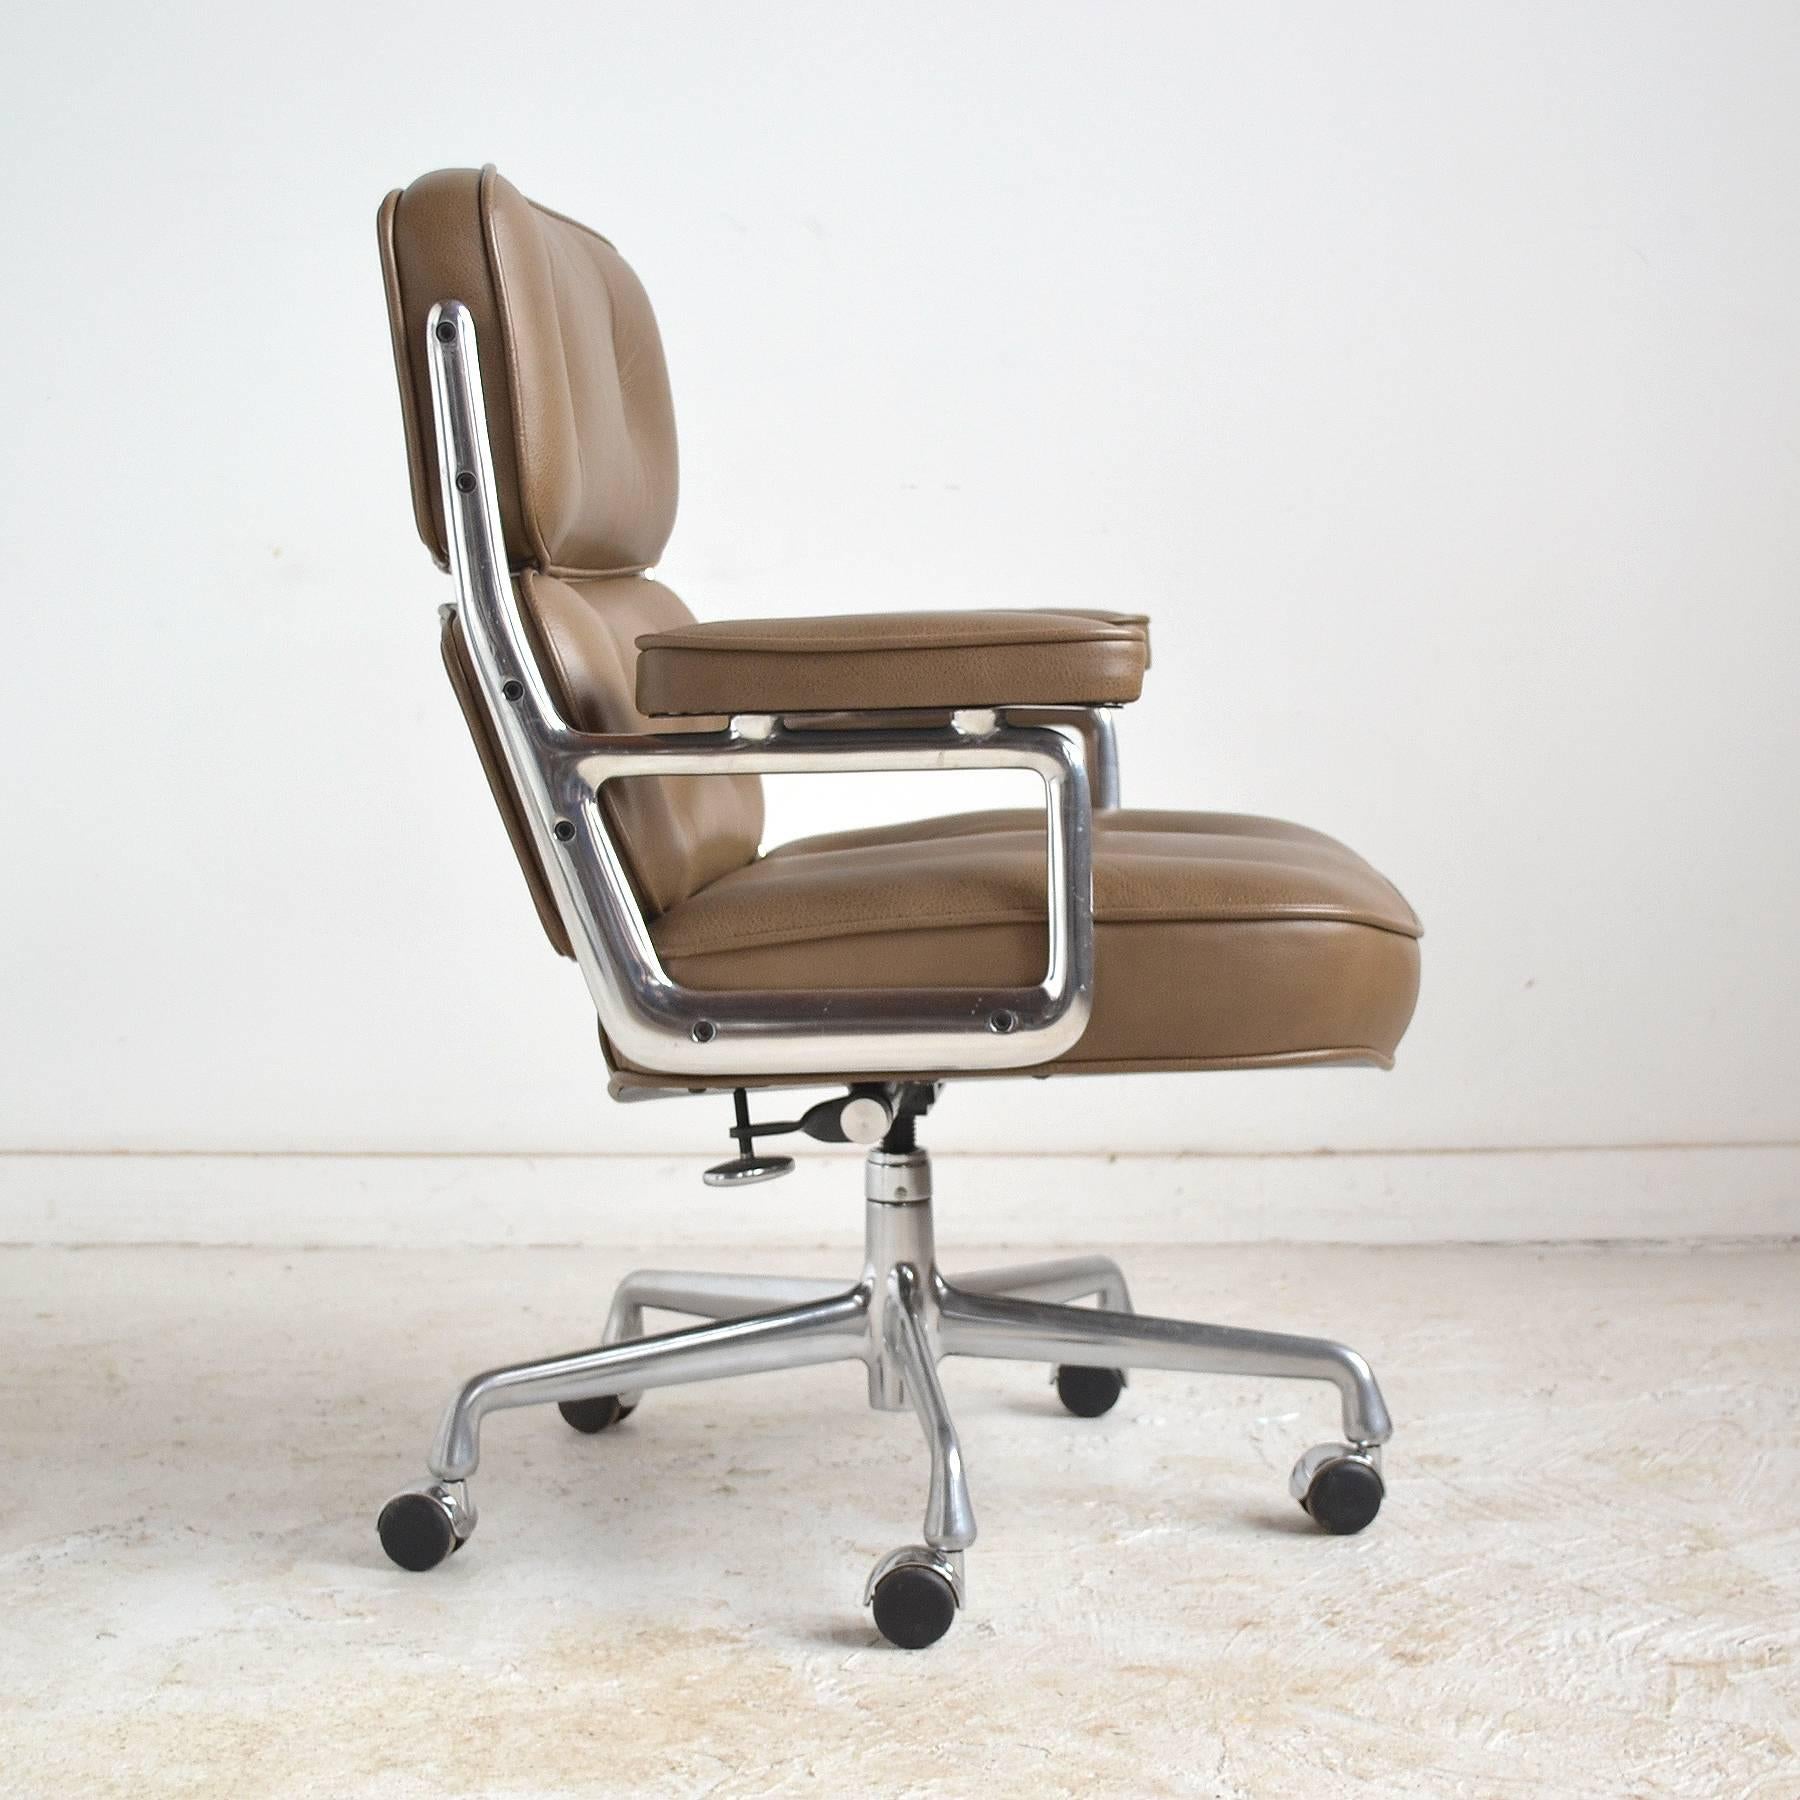 Charles and Ray Eames Pair of Time-Life Chairs by Herman Miller 2